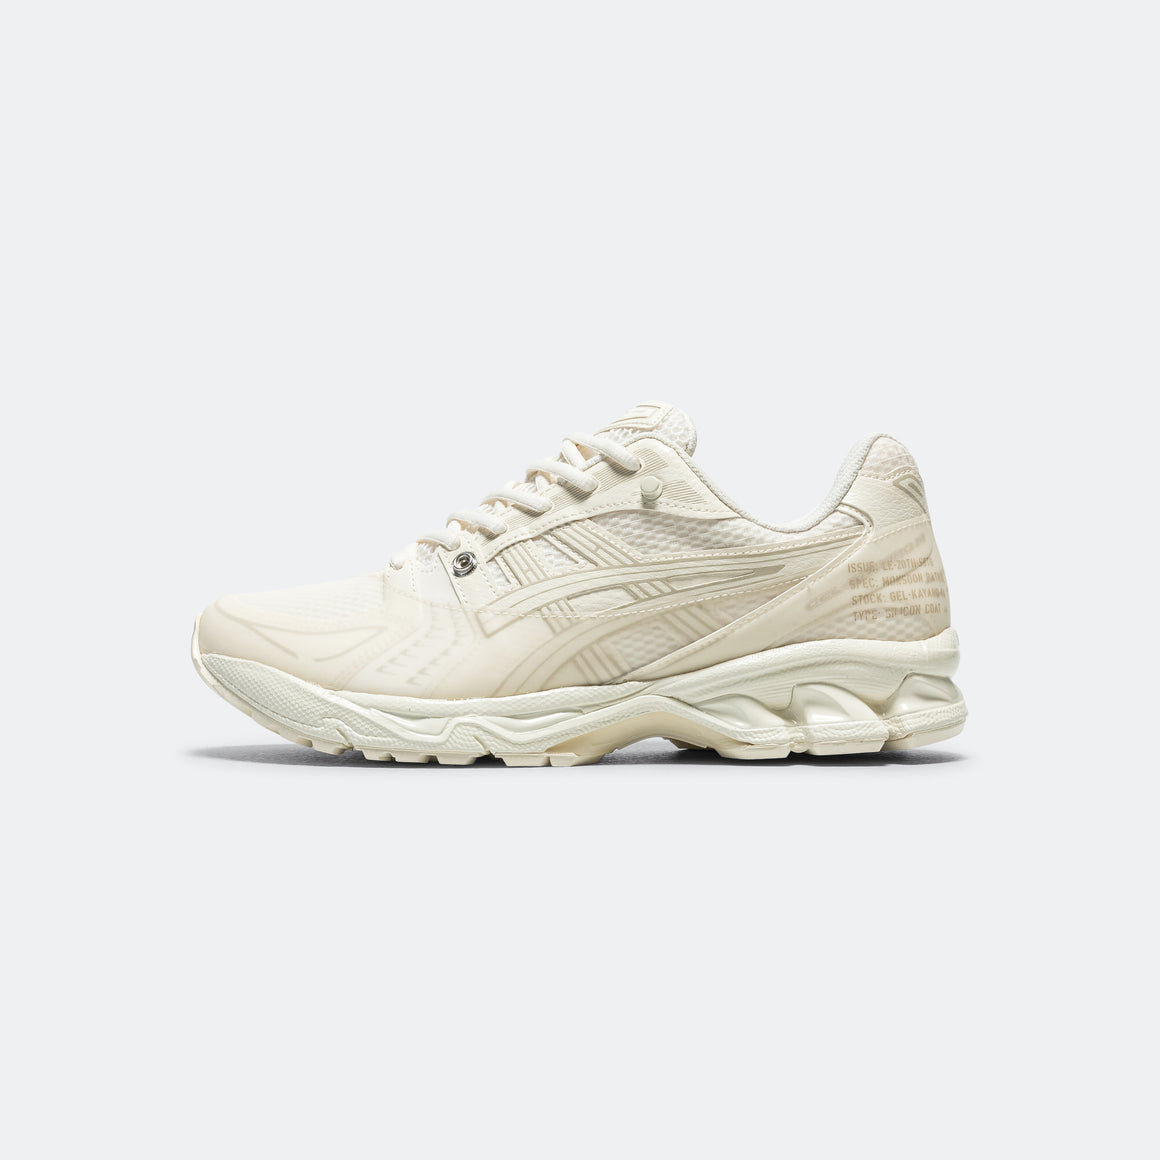 Asics - GEL-Kayano 14 x SBTG x Limited Edt - Cream - UP THERE